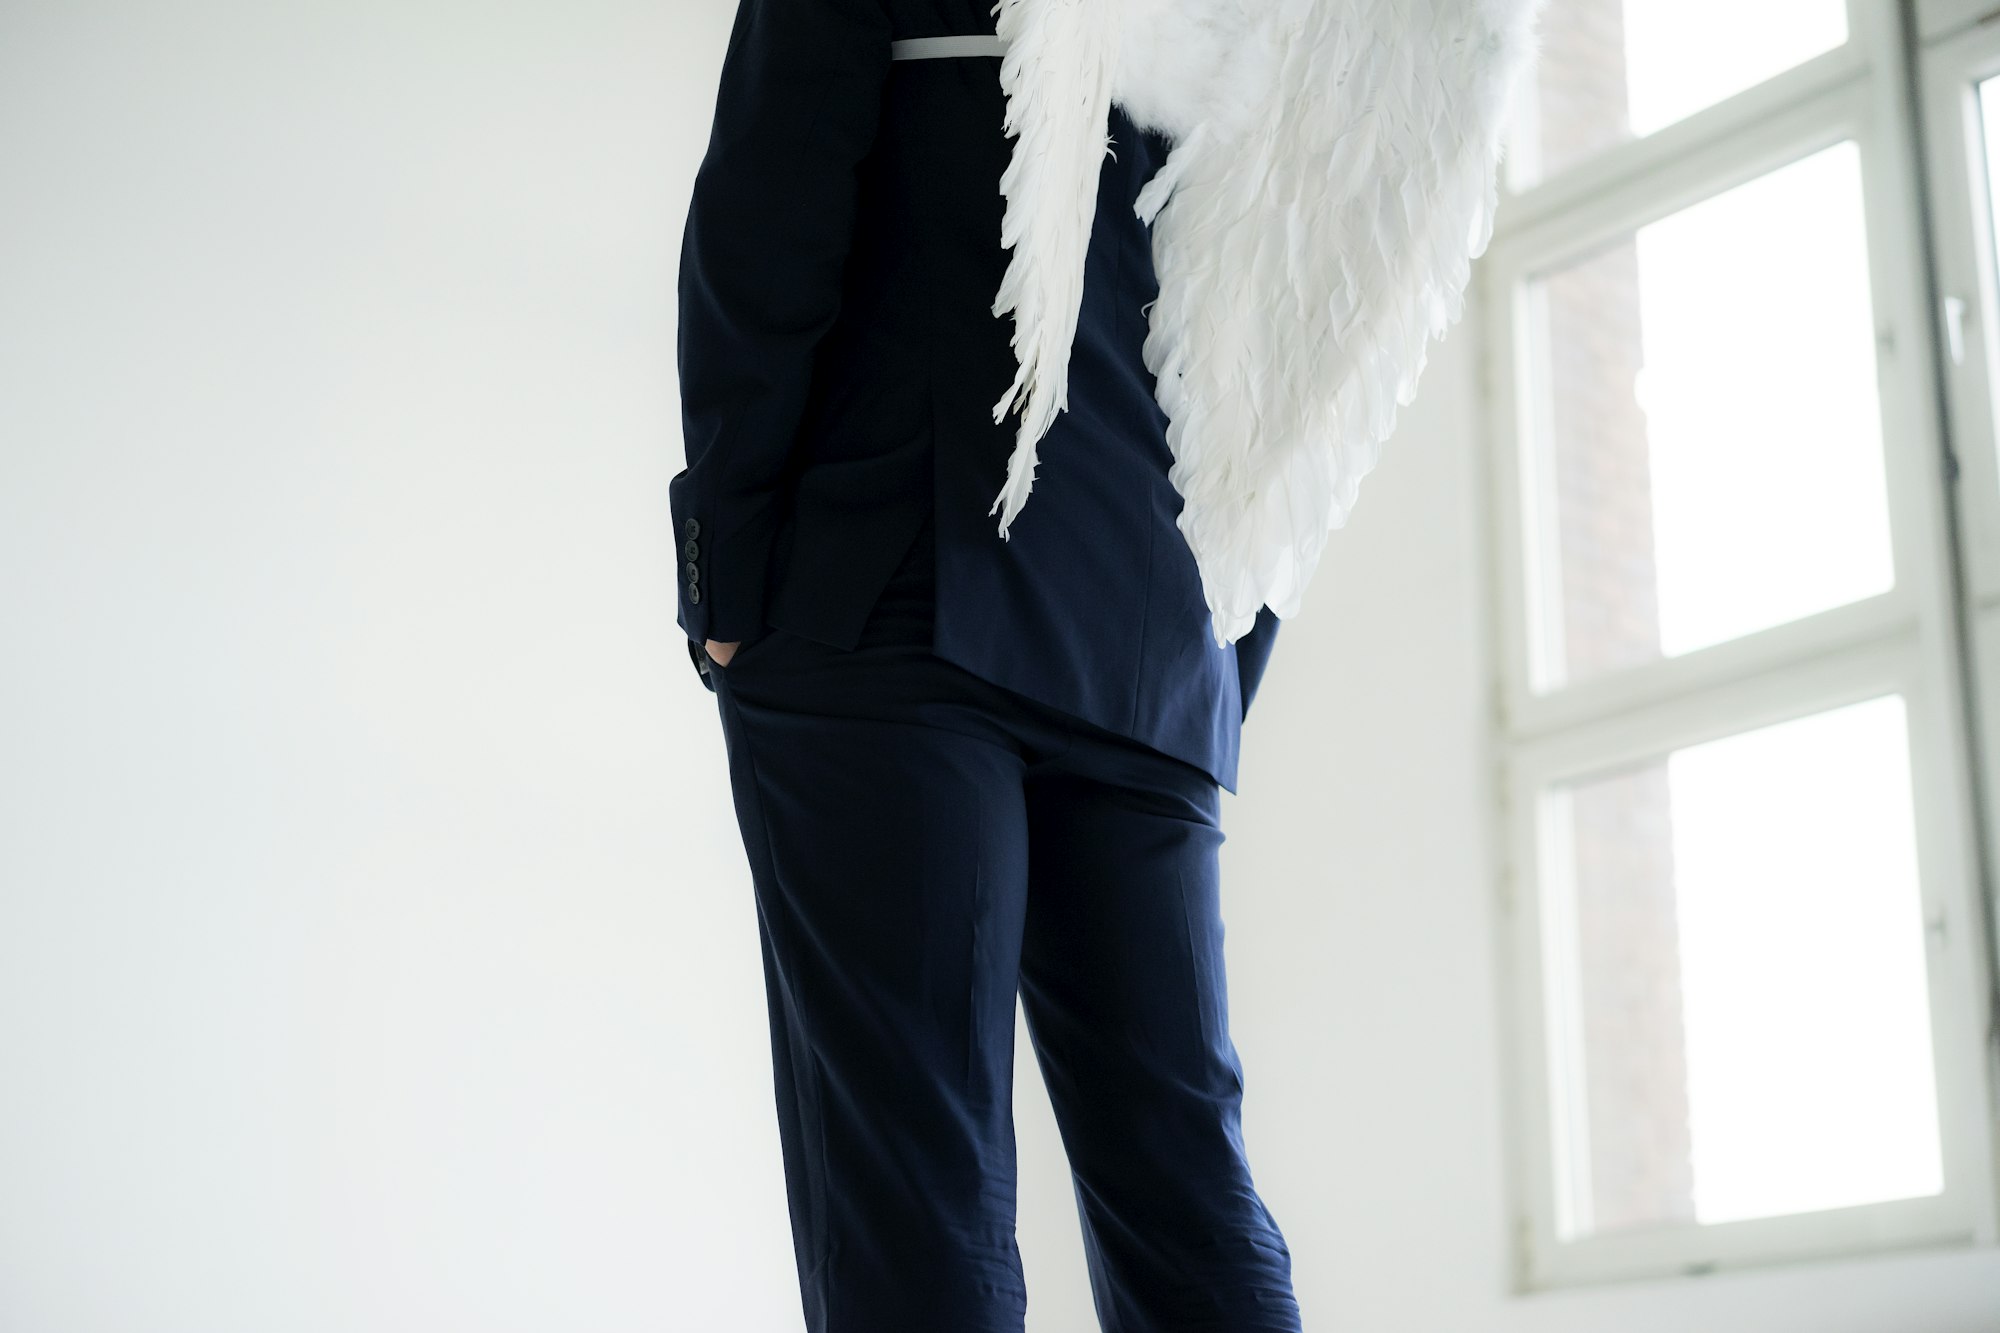 Businessman wearing suit and angel's wings, rear view